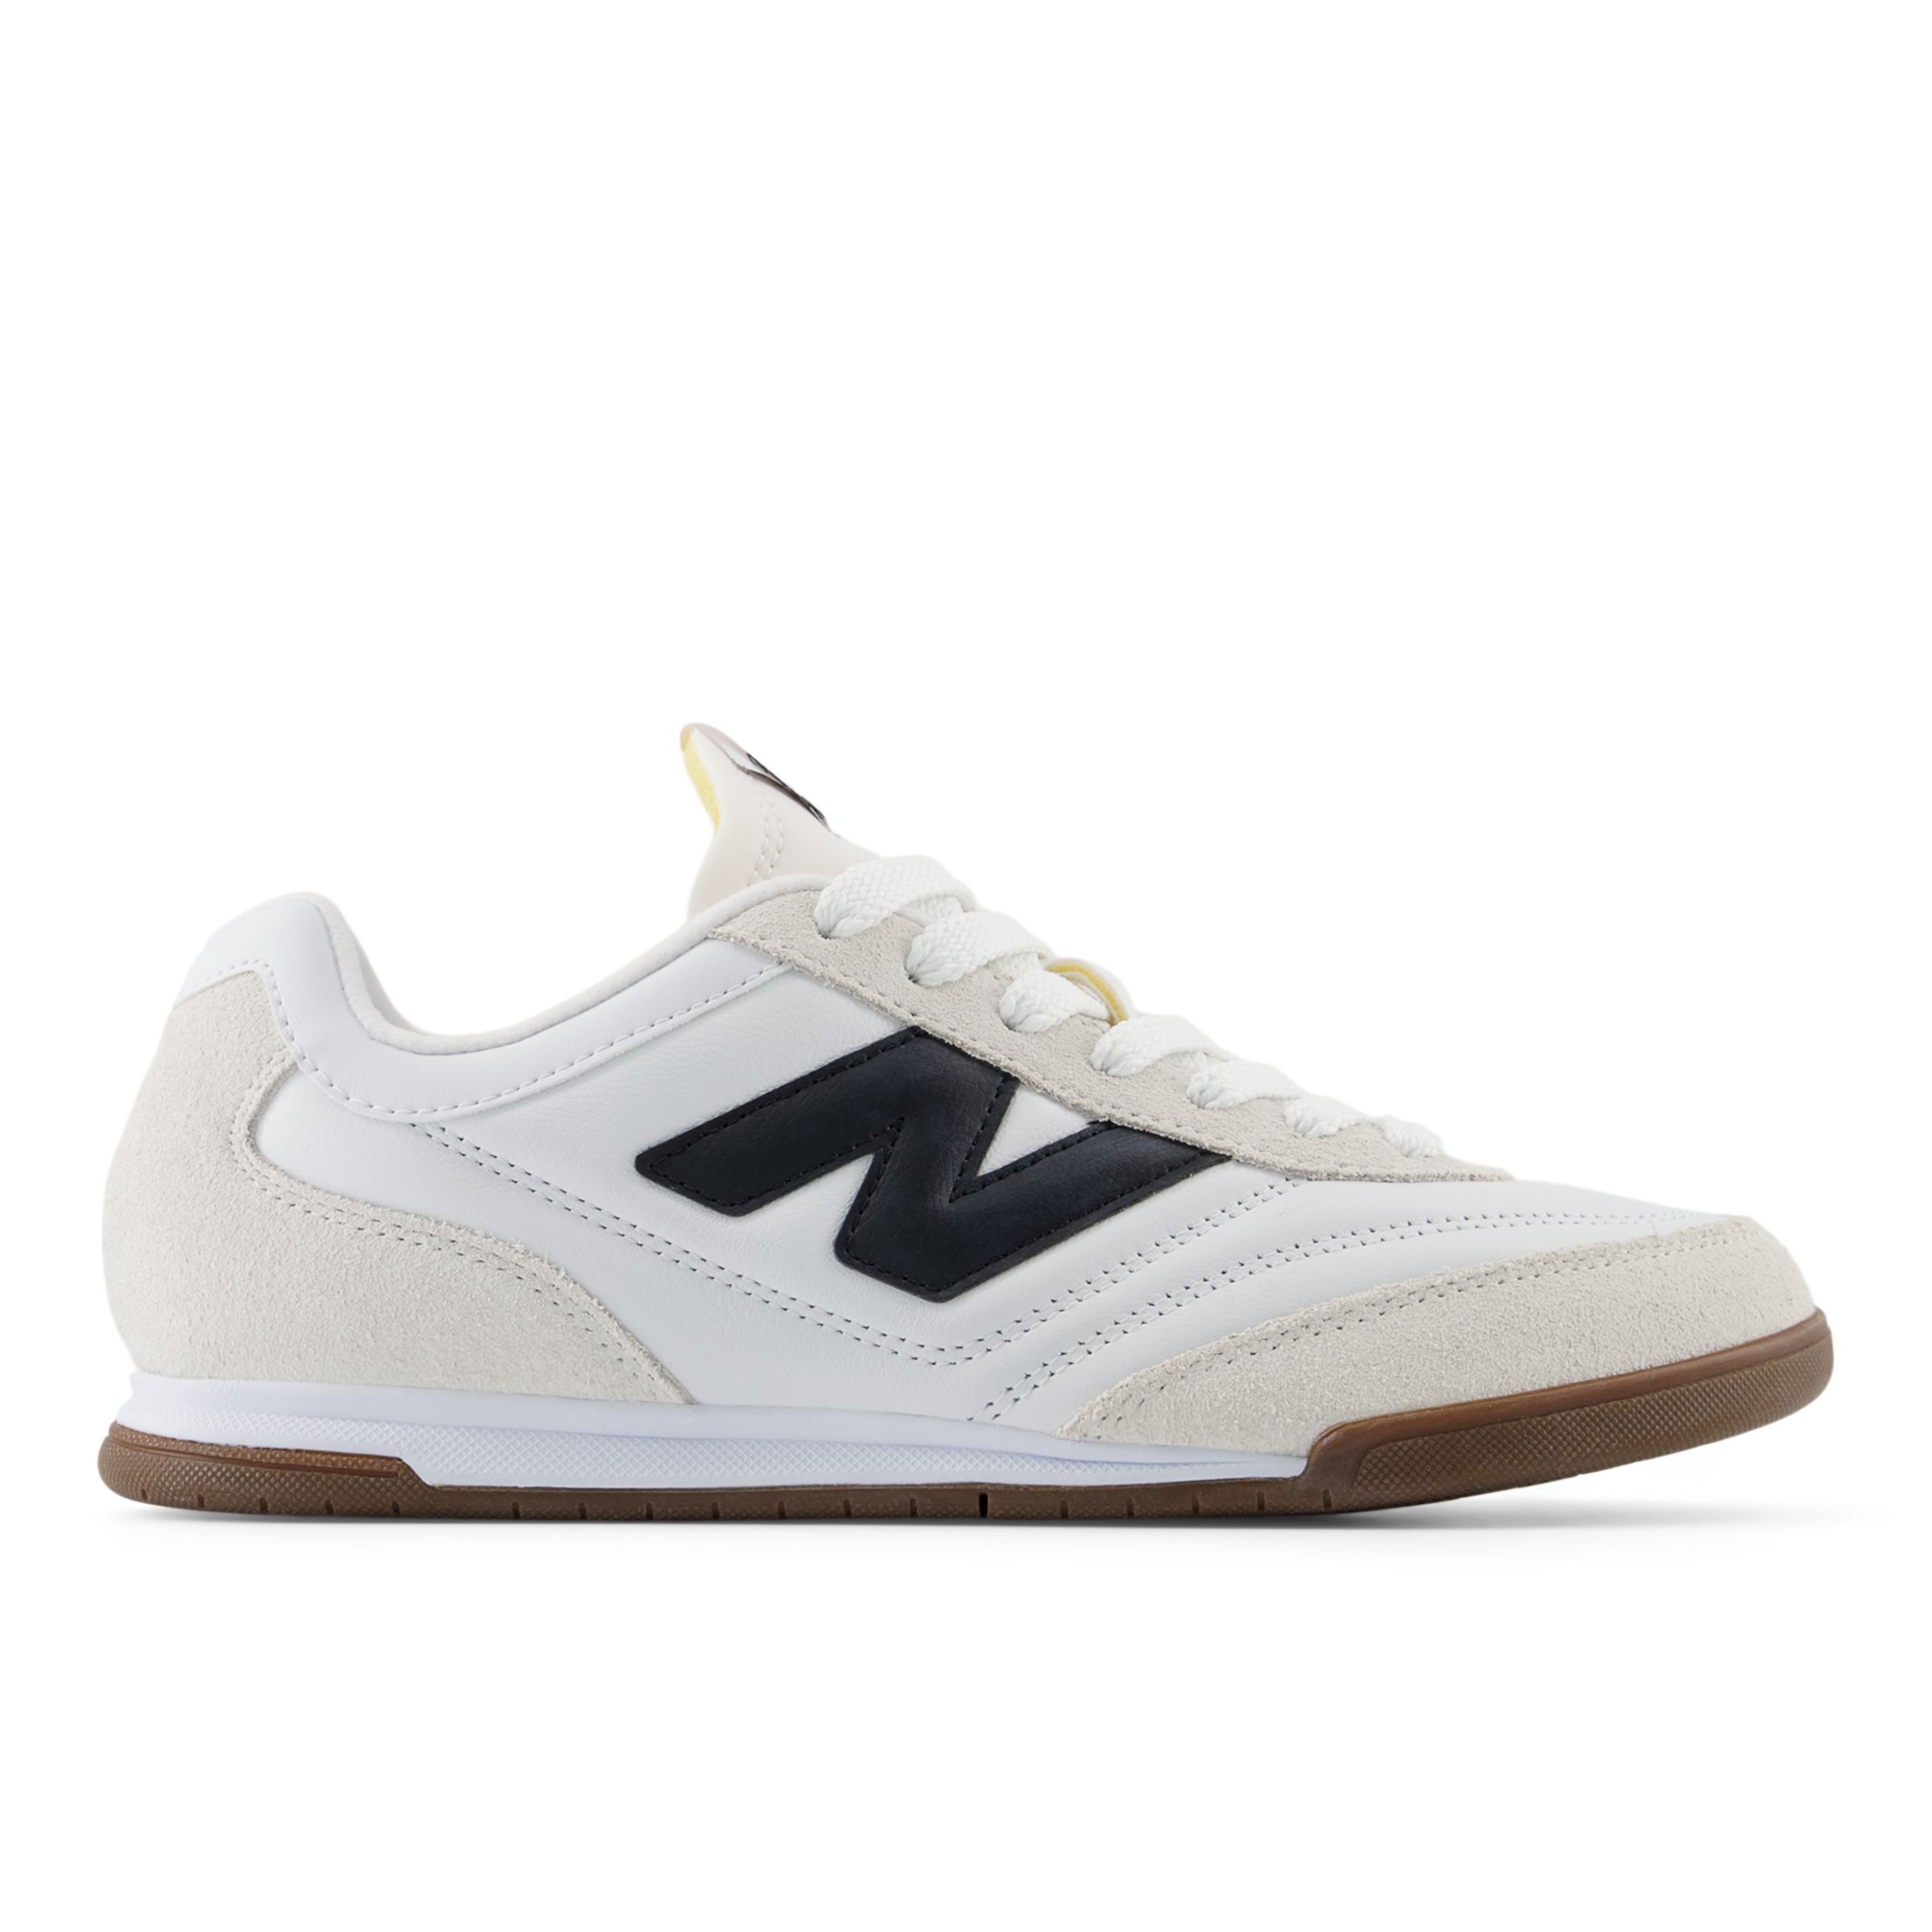 New Balance Unisexe RC42 en Blanc/Gris, Synthetic, Taille 46.5 Large